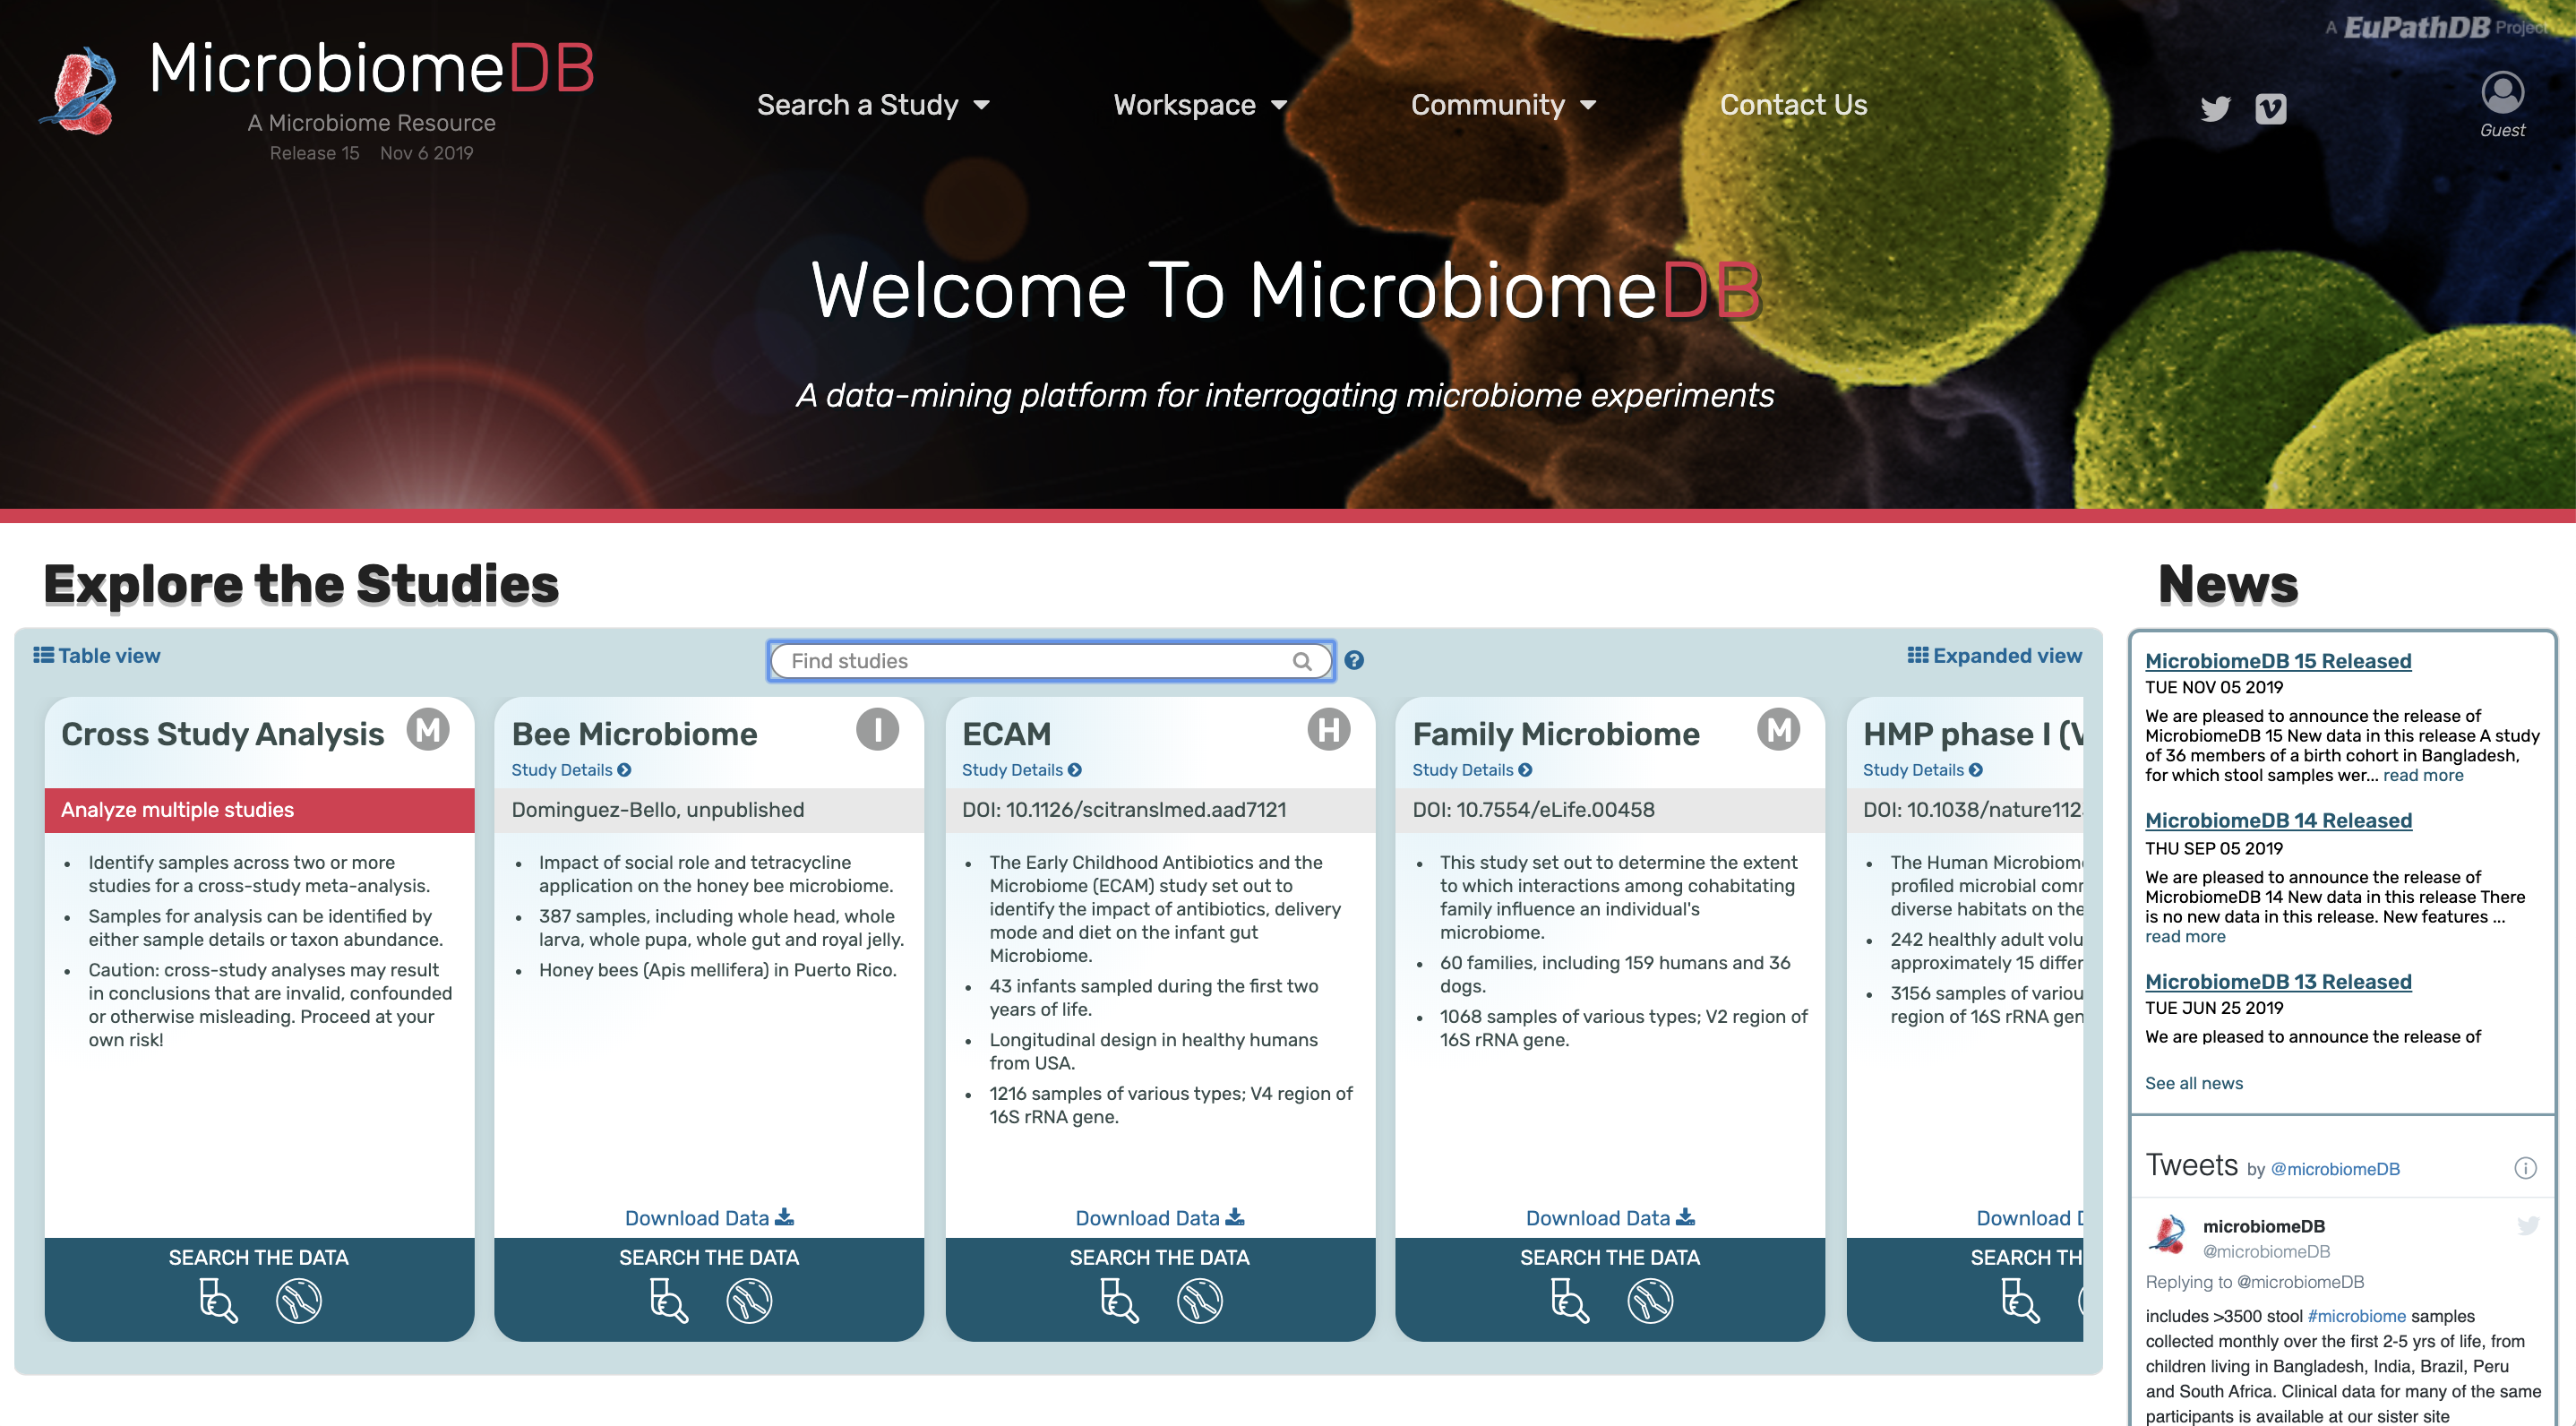 Database-driven approach to microbiome research